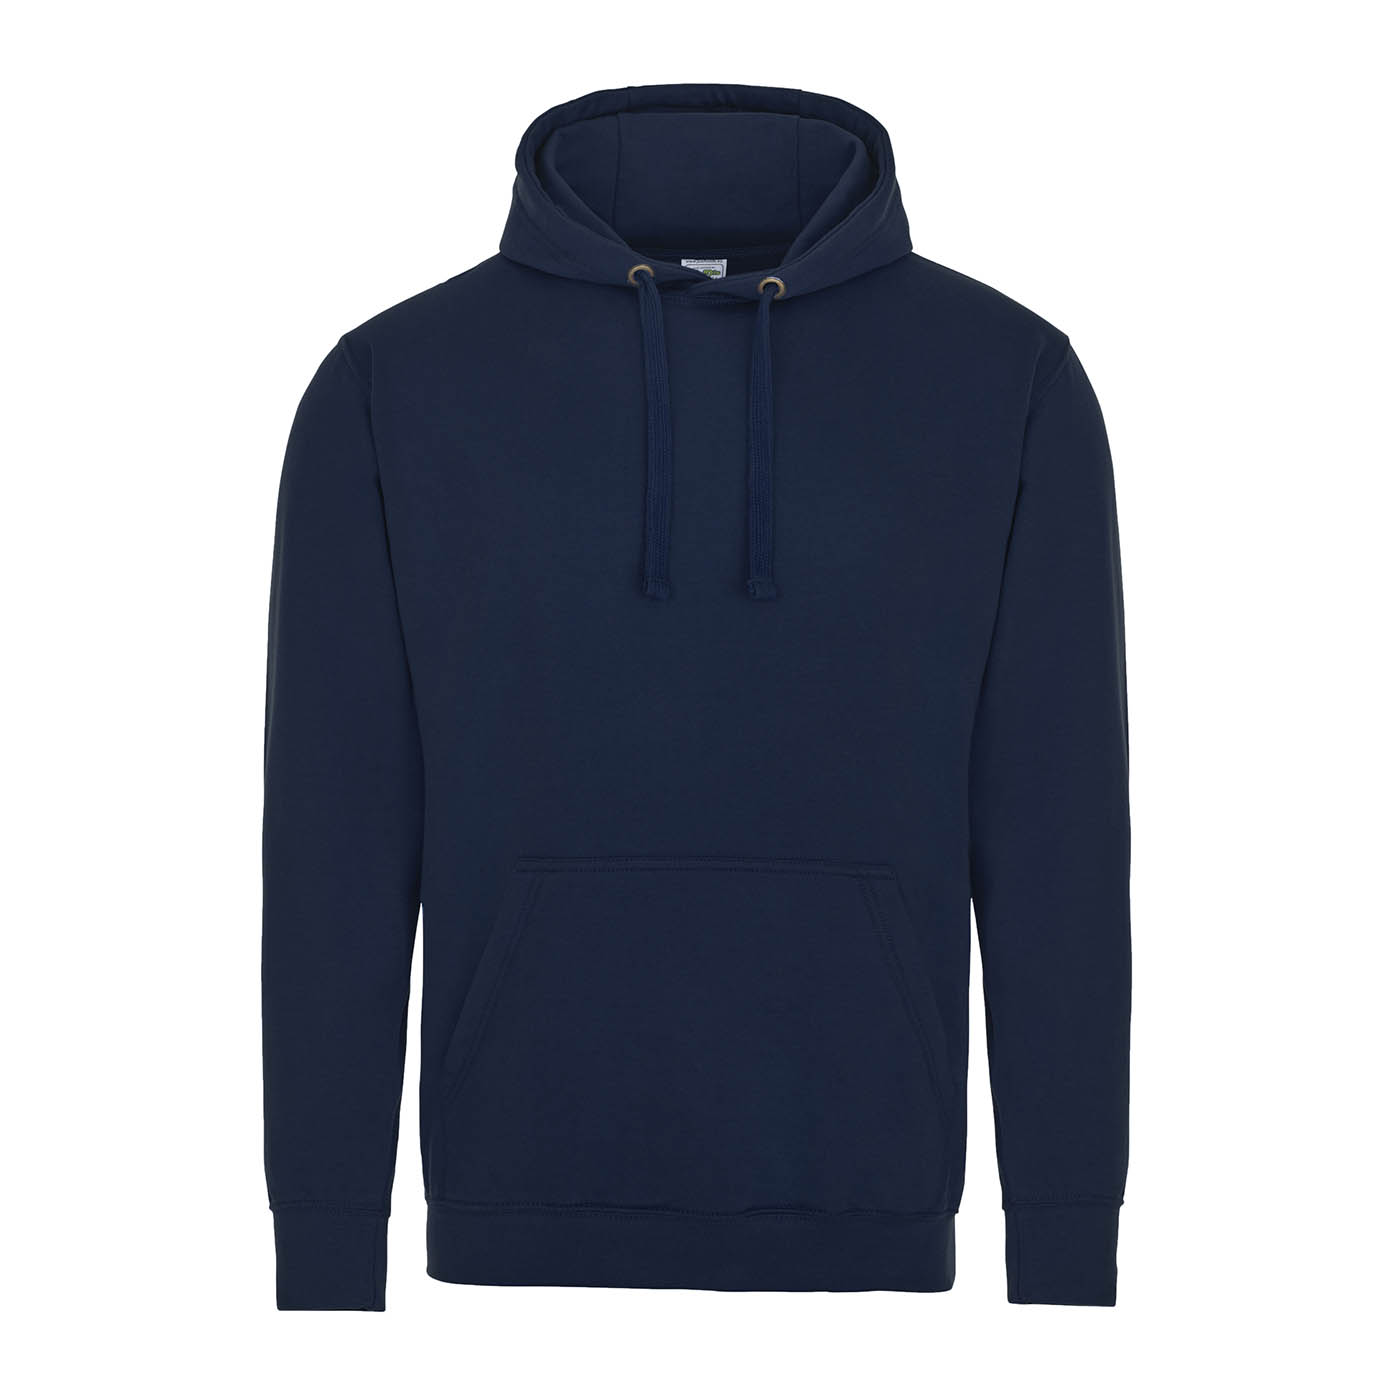 NAVY HOODED SWEATER